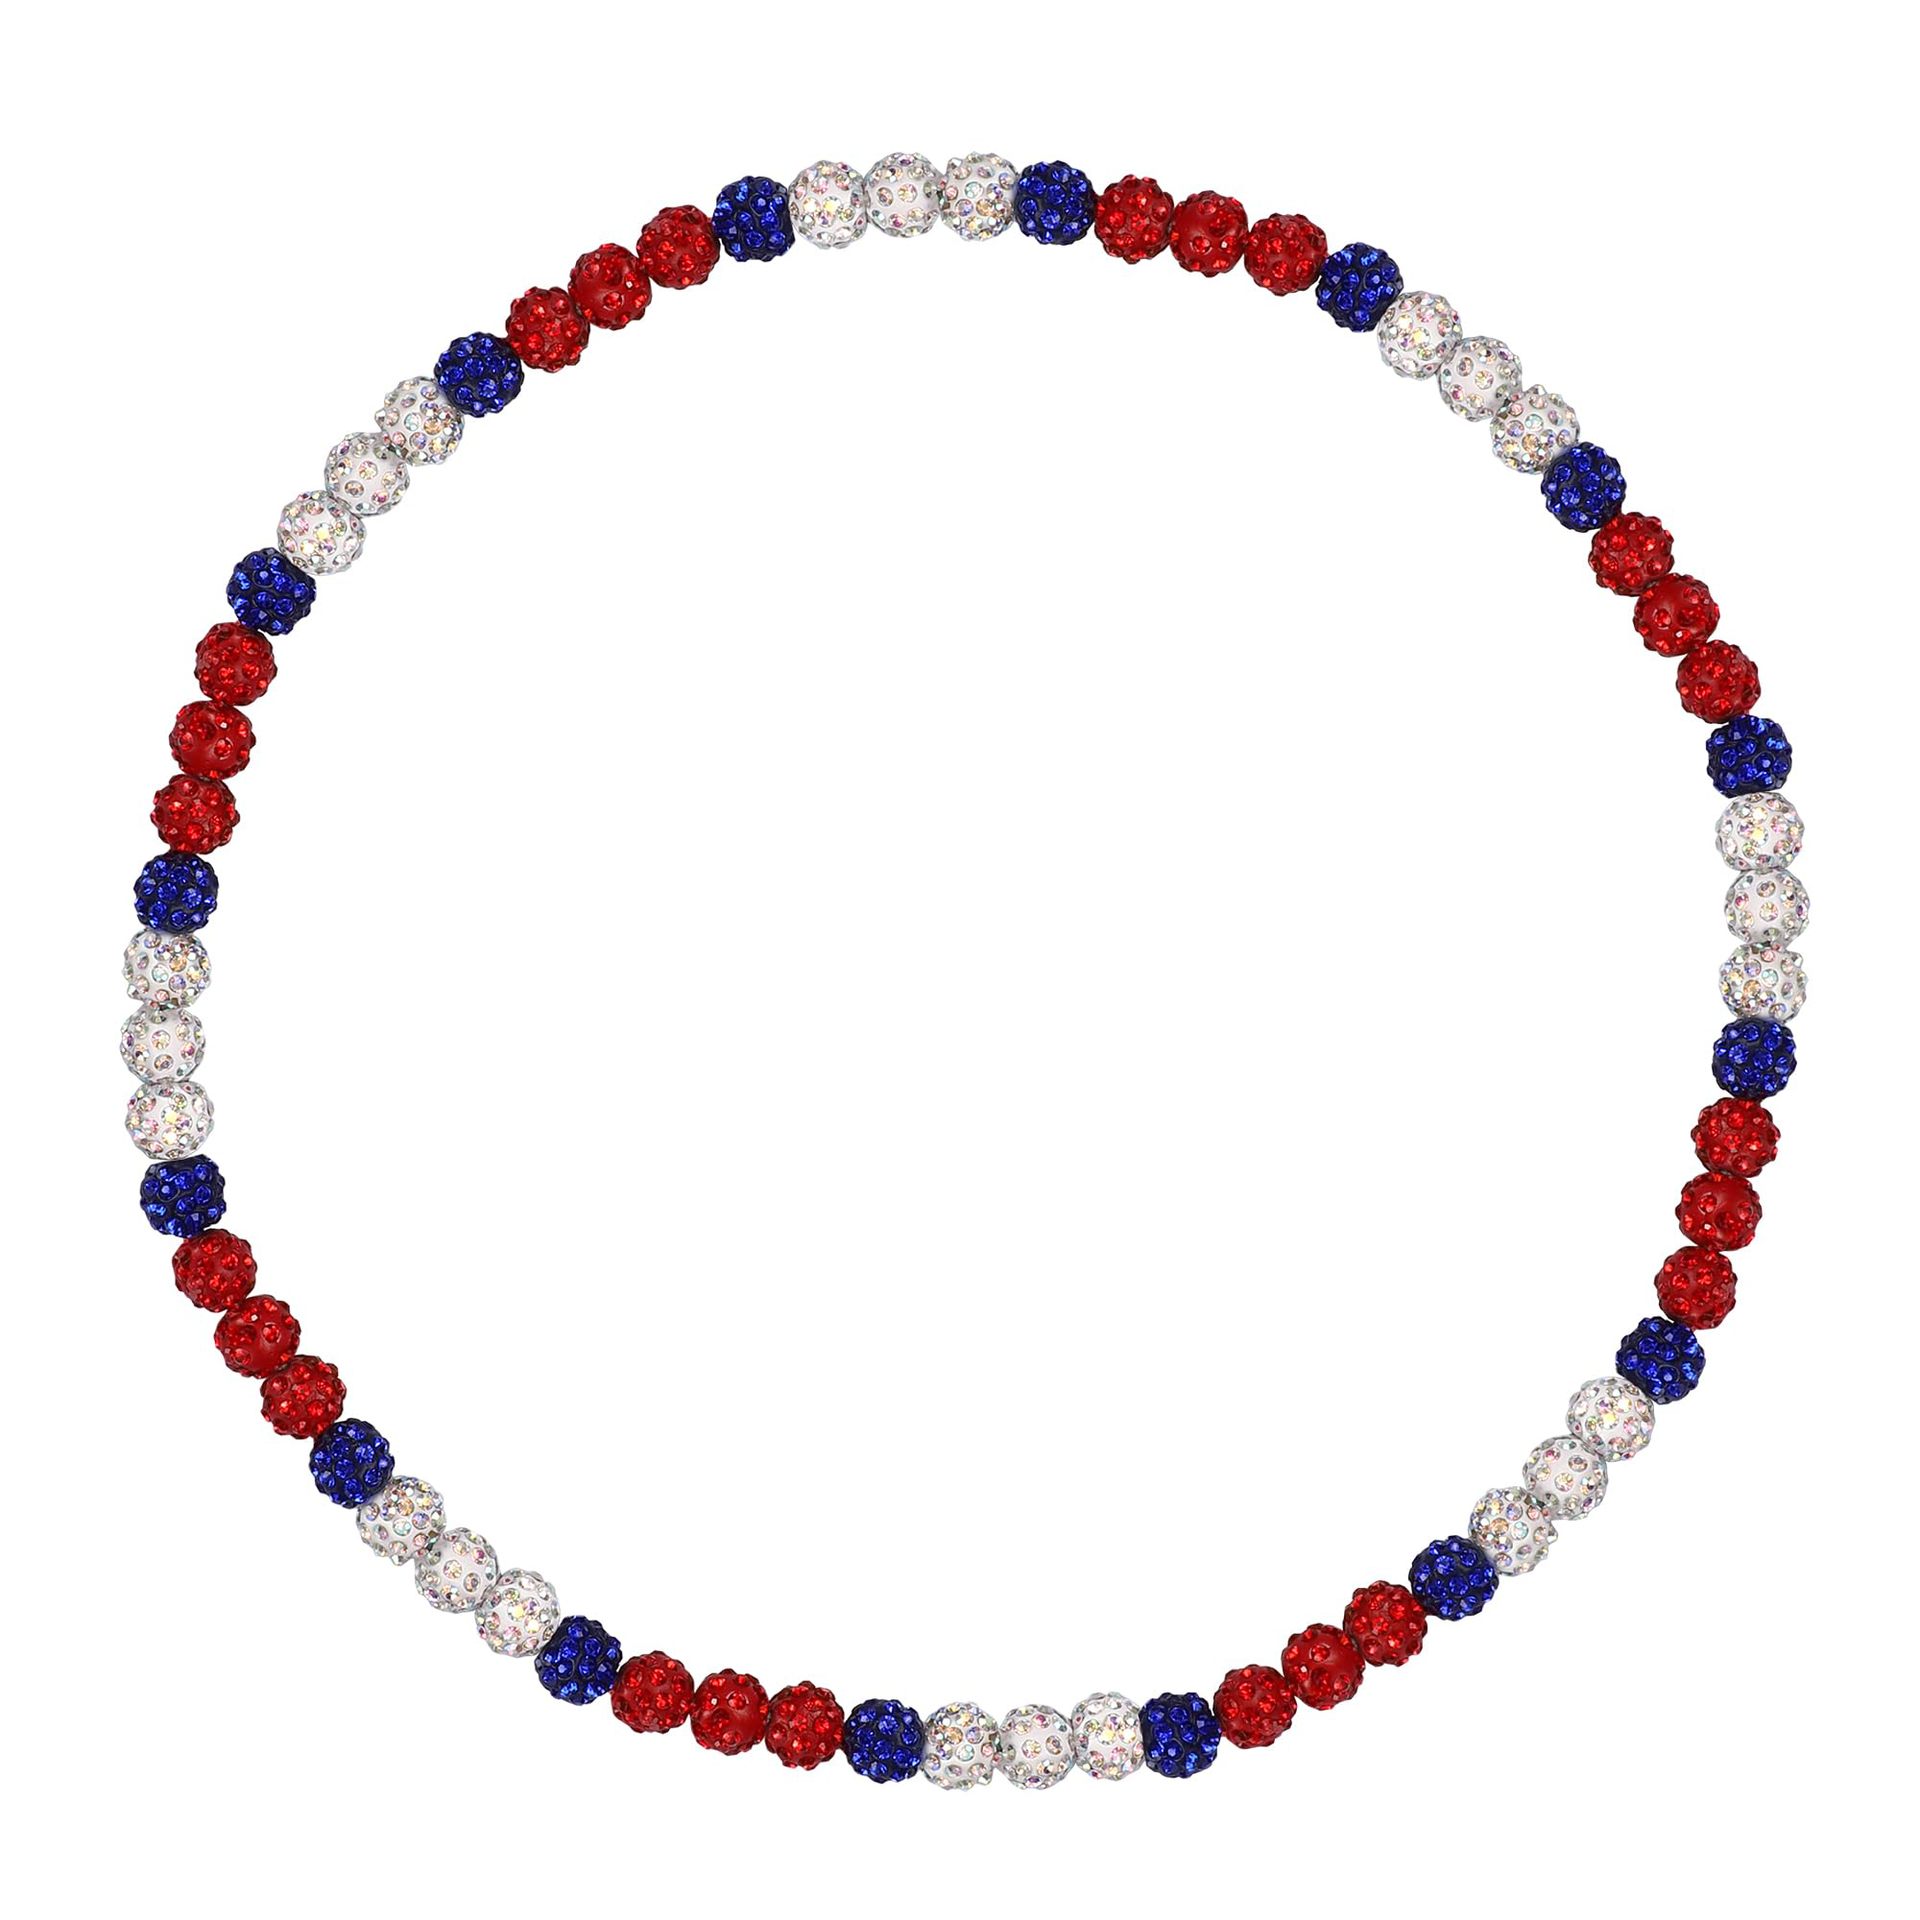 3:8mm red, white and blue diamond